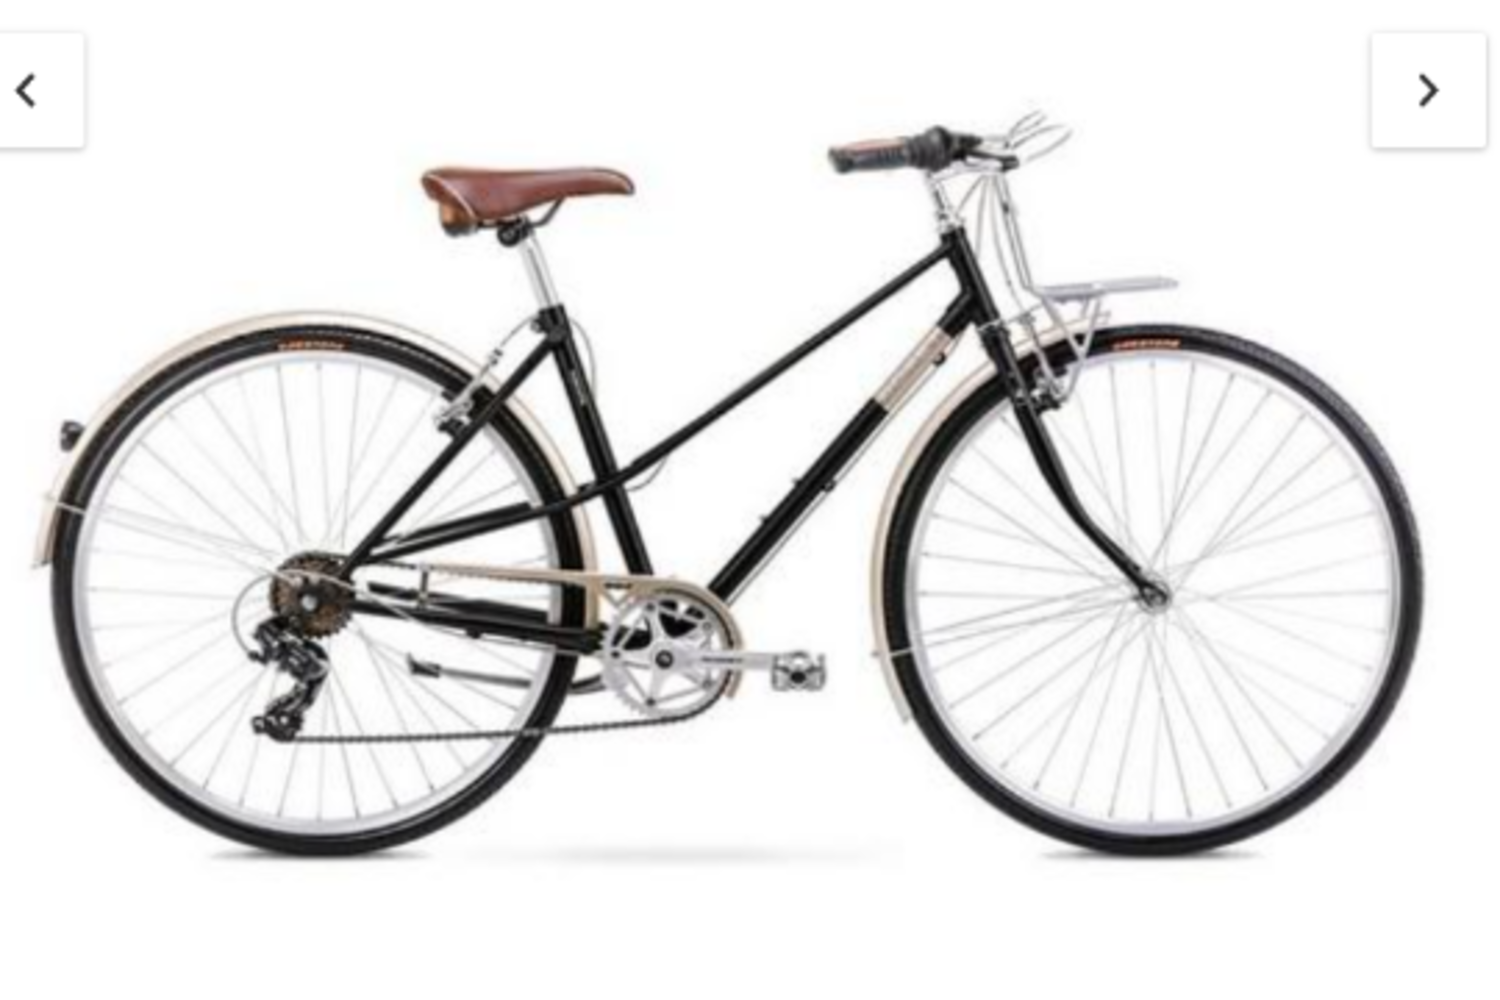 New & Boxed Bikes - Childrens & Adults - Various Brands, Sizes & Styles - Delivery Available!